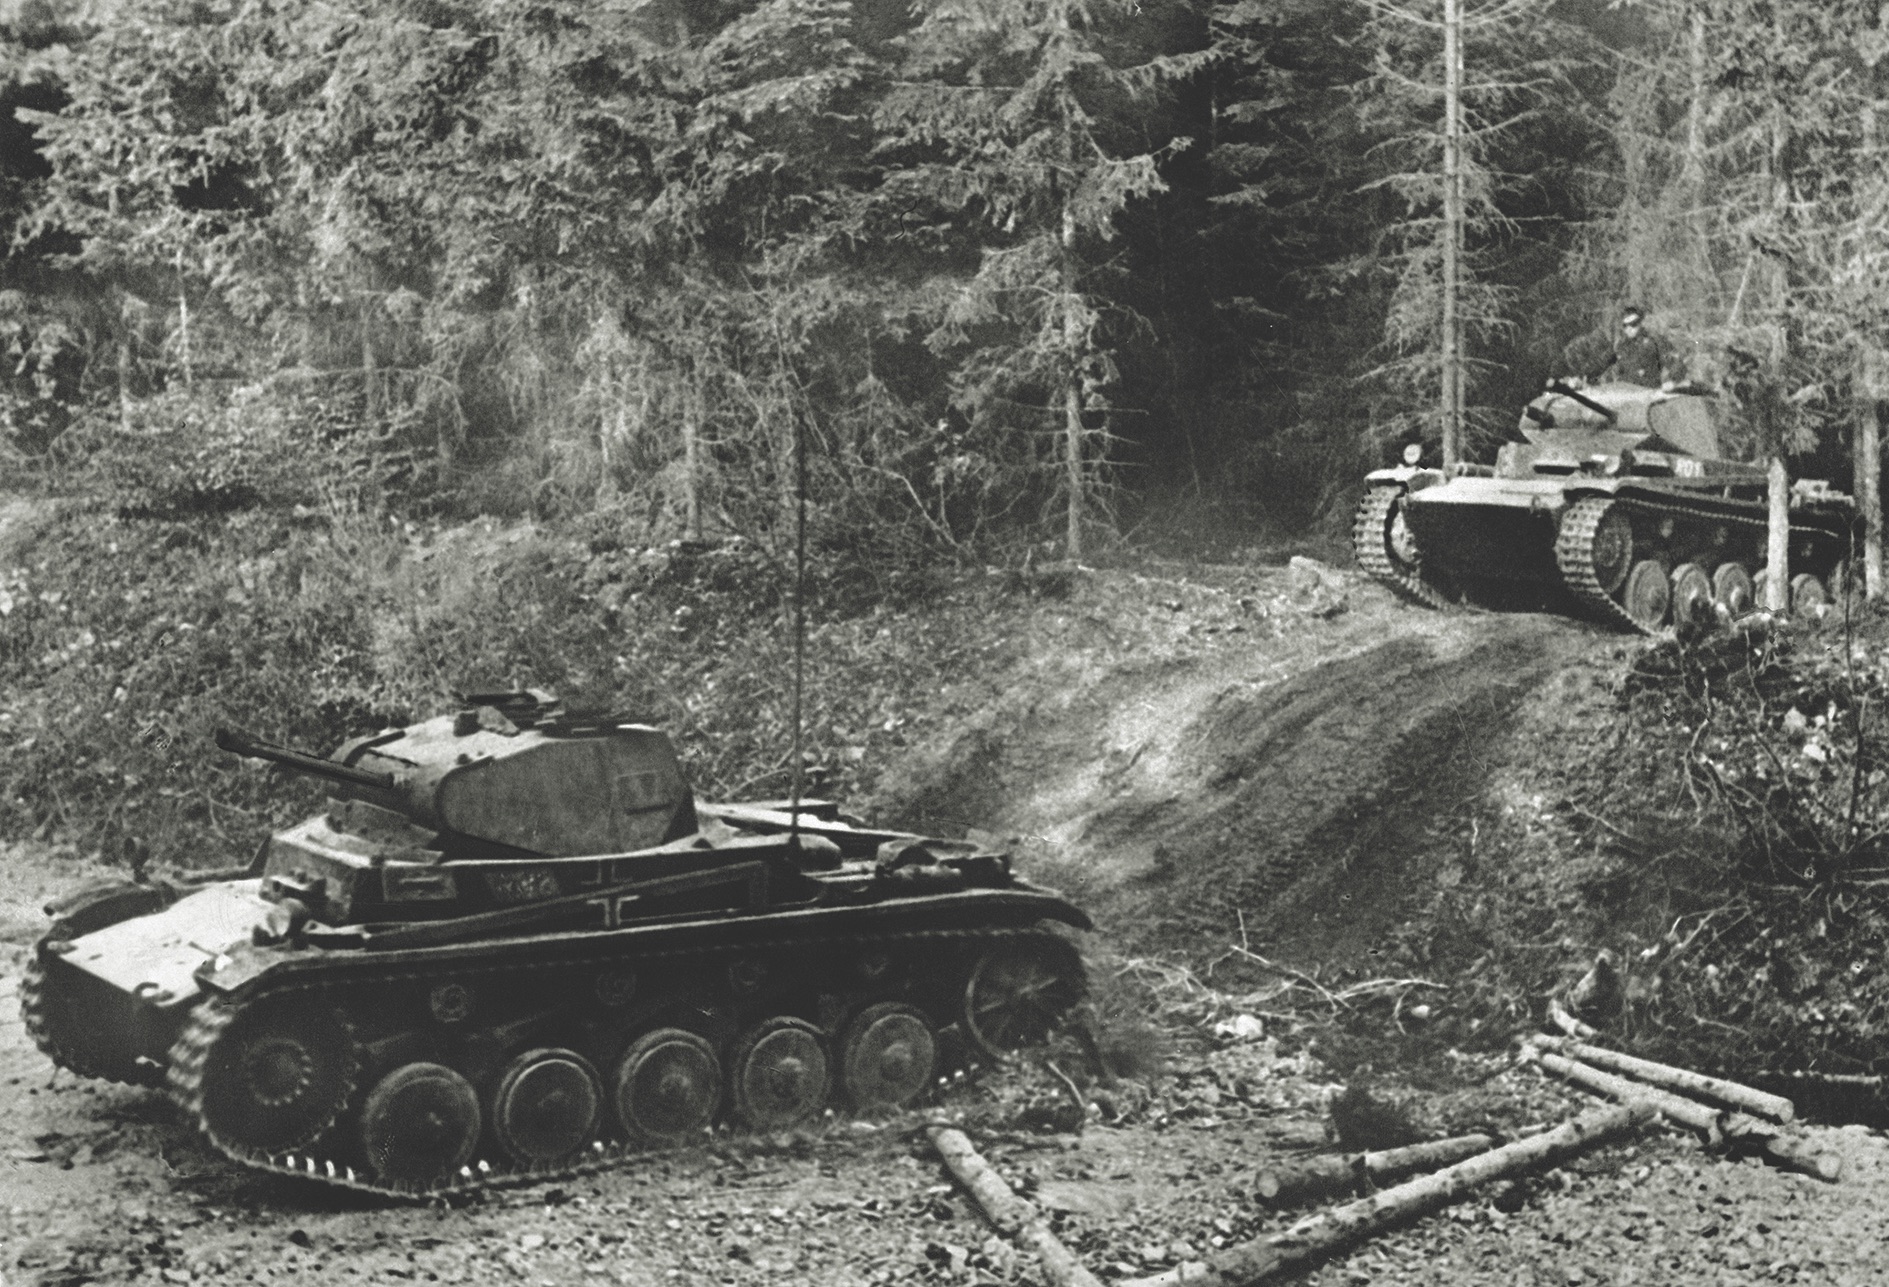 German armor bypassed much of the line by moving through the “impenetrable” Ardennes Forest. (Ullstein Bild, Getty Images)